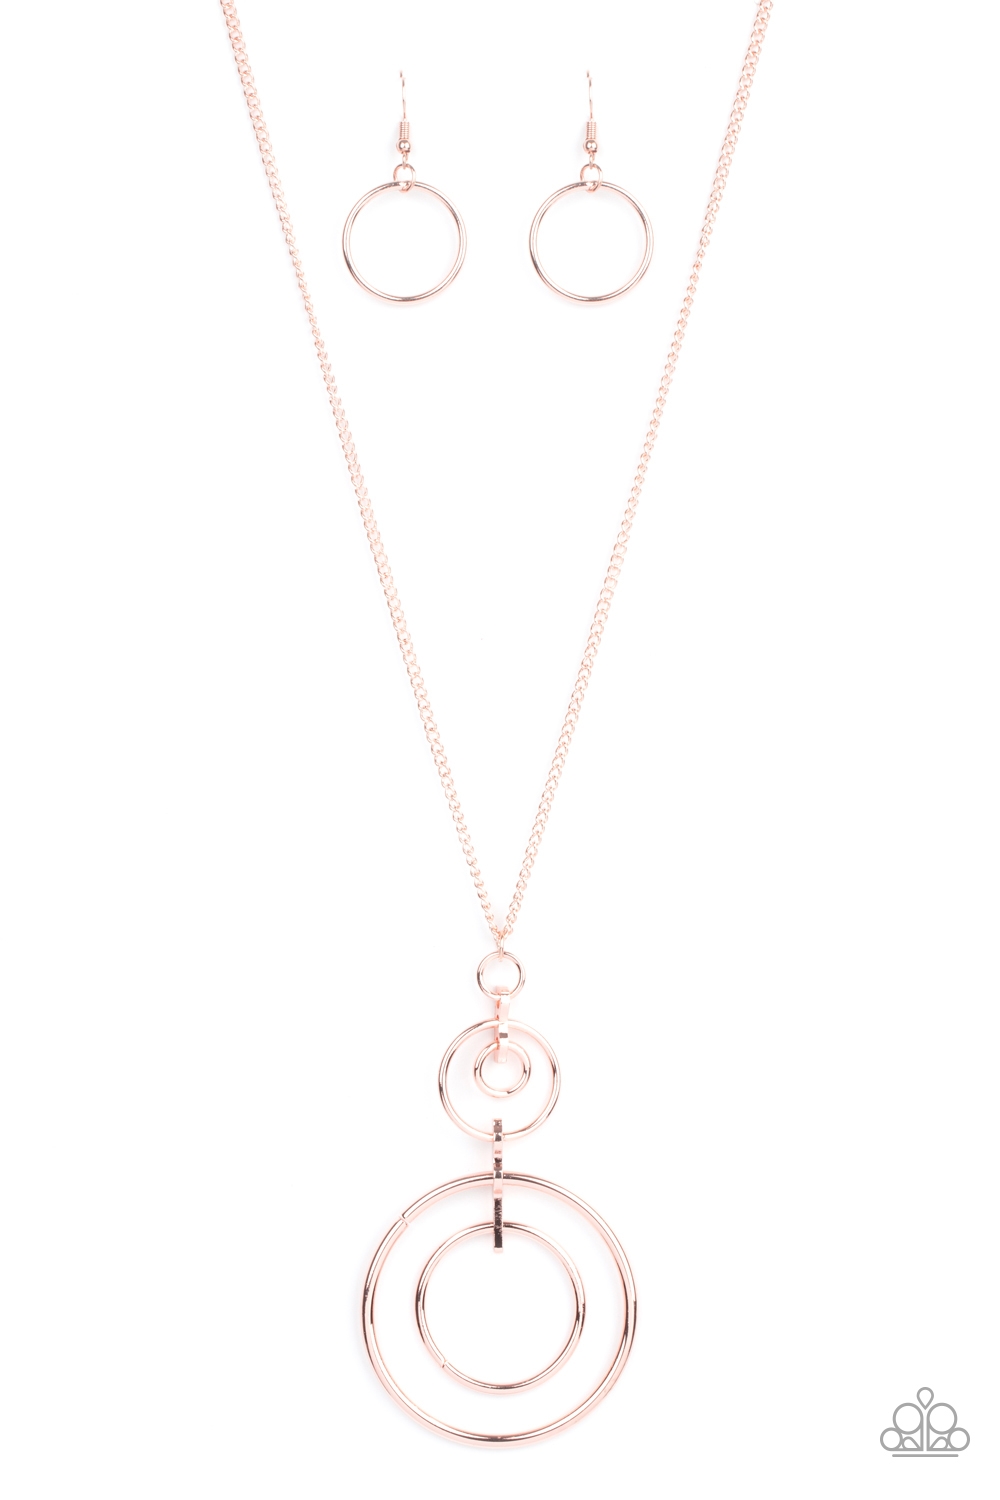 Necklace - The Inner Workings - Rose Gold